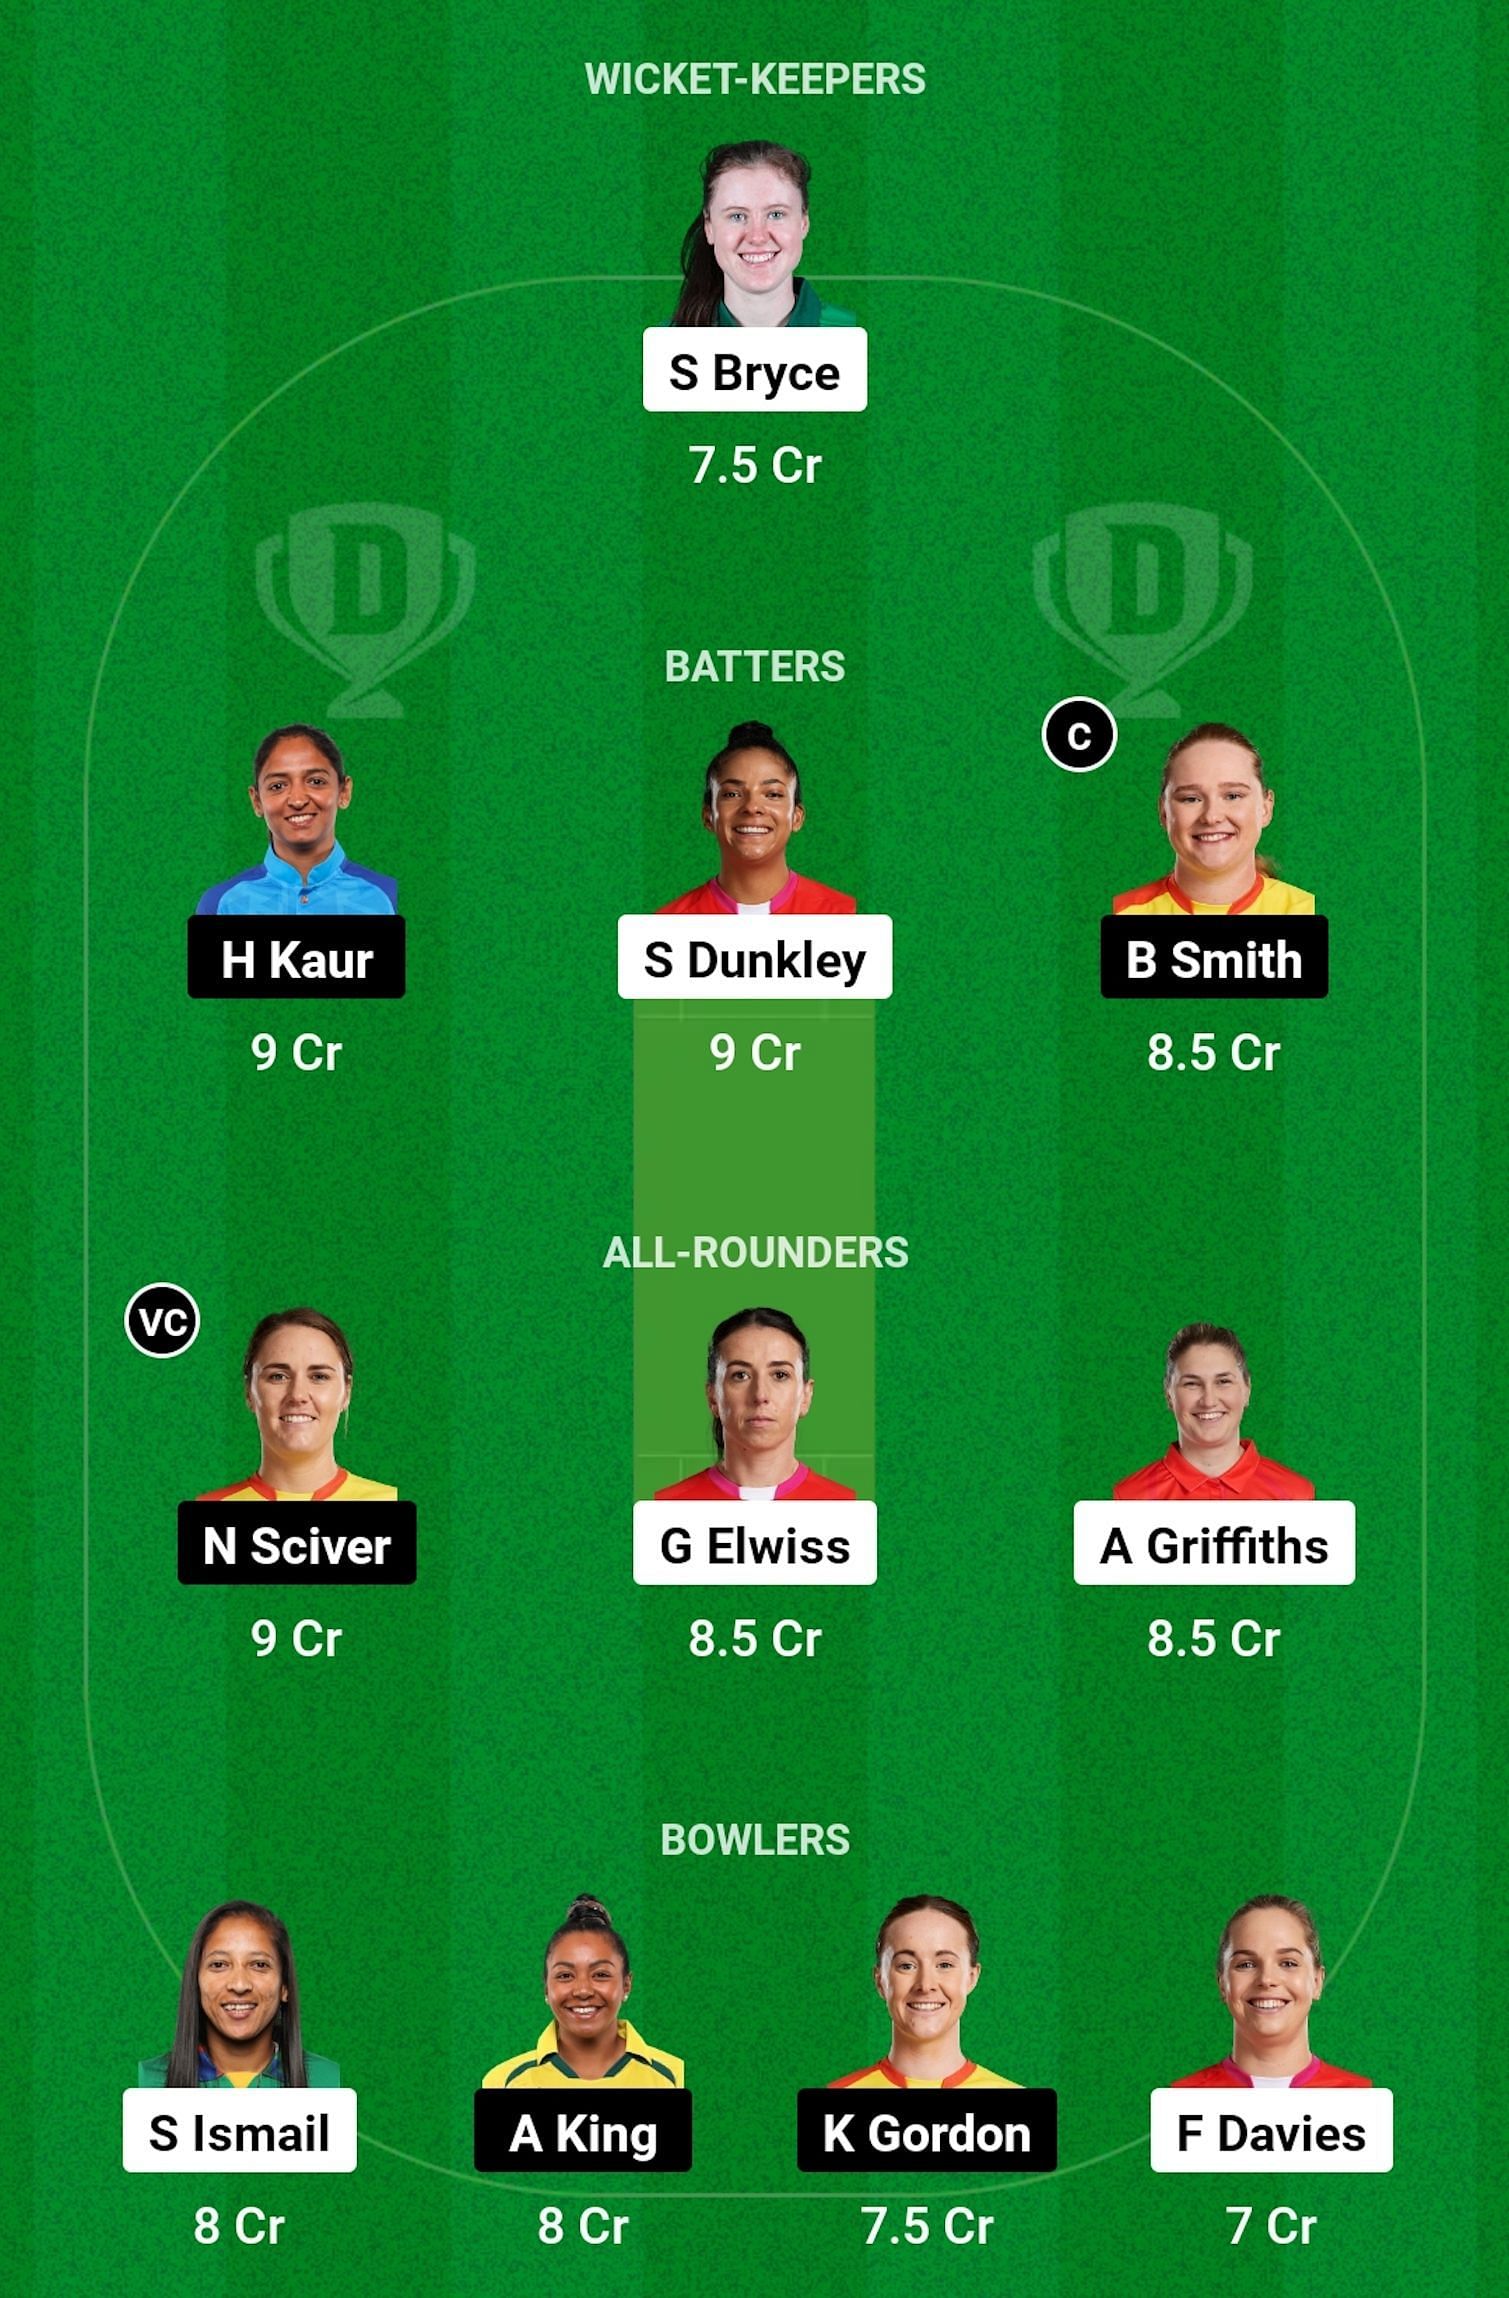 WEF-W vs TRT-W The Hundred Women Dream11 Prediction, Fantasy Tips Welsh  Fire Women vs Trent Rockets Women: Captain, Vice Captain, Probable XIs For  Today's Match 20 In Cardiff - August 14, 7:30